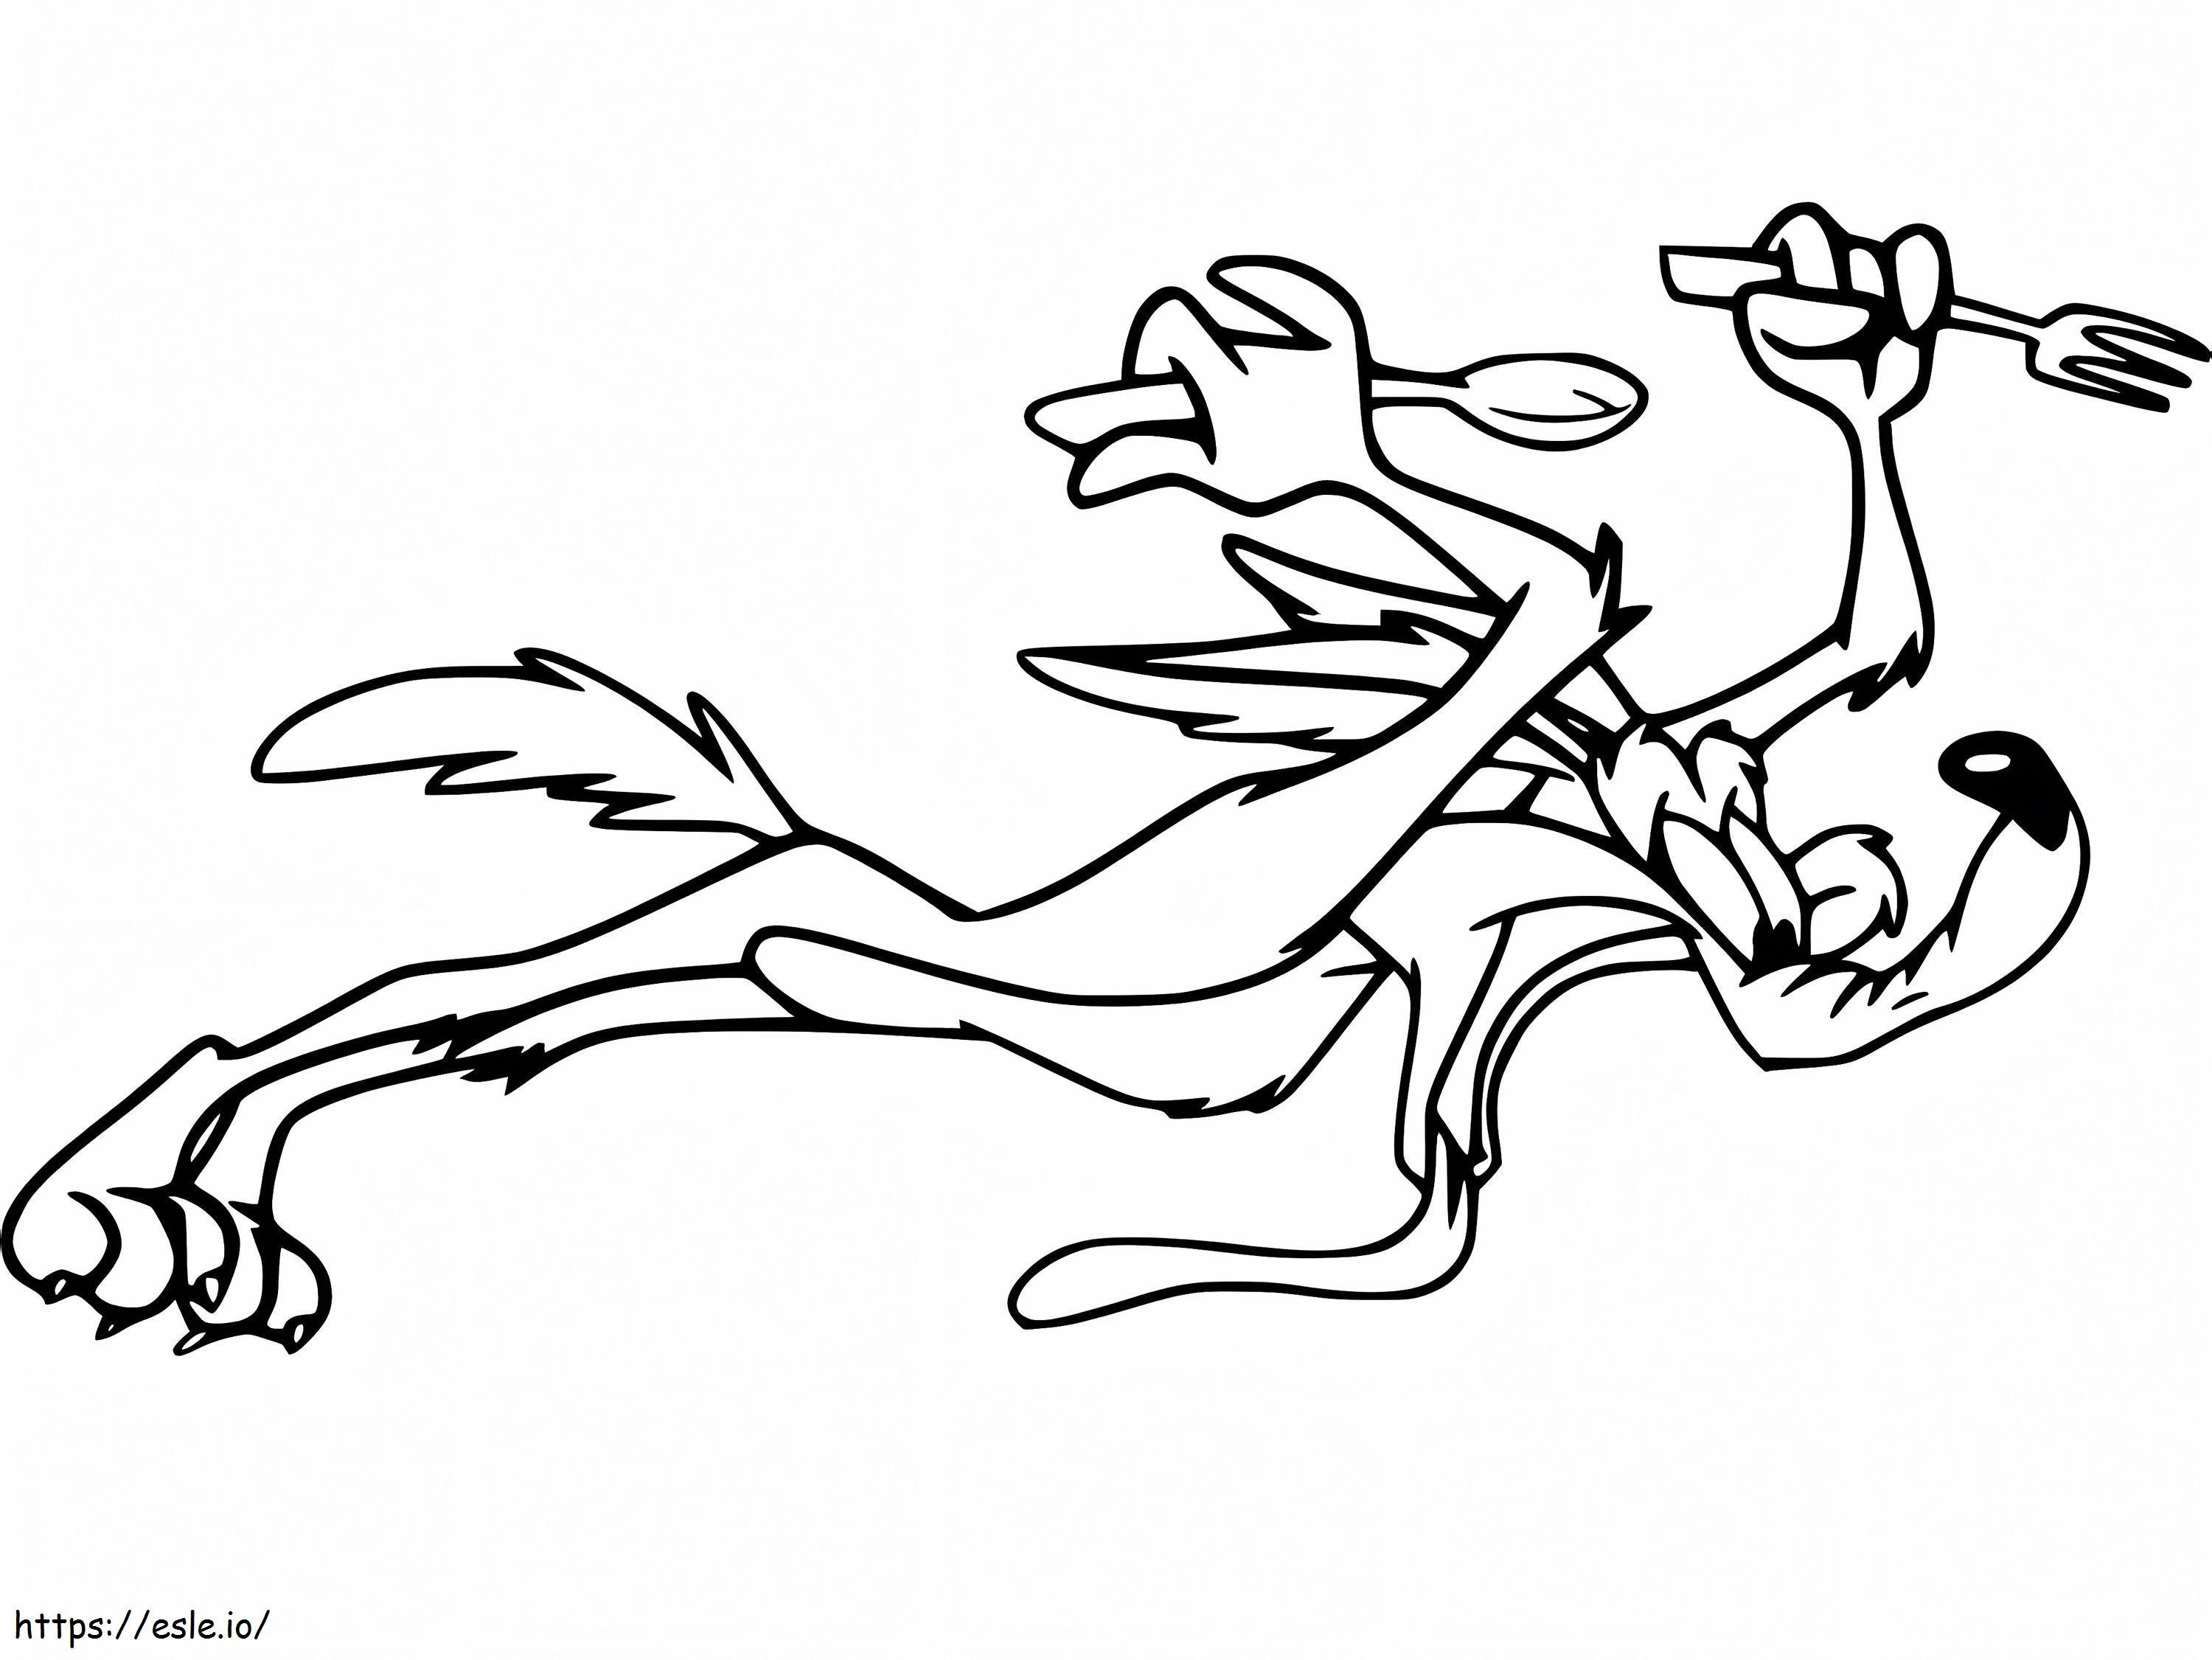 Wile E Coyote Hungry coloring page